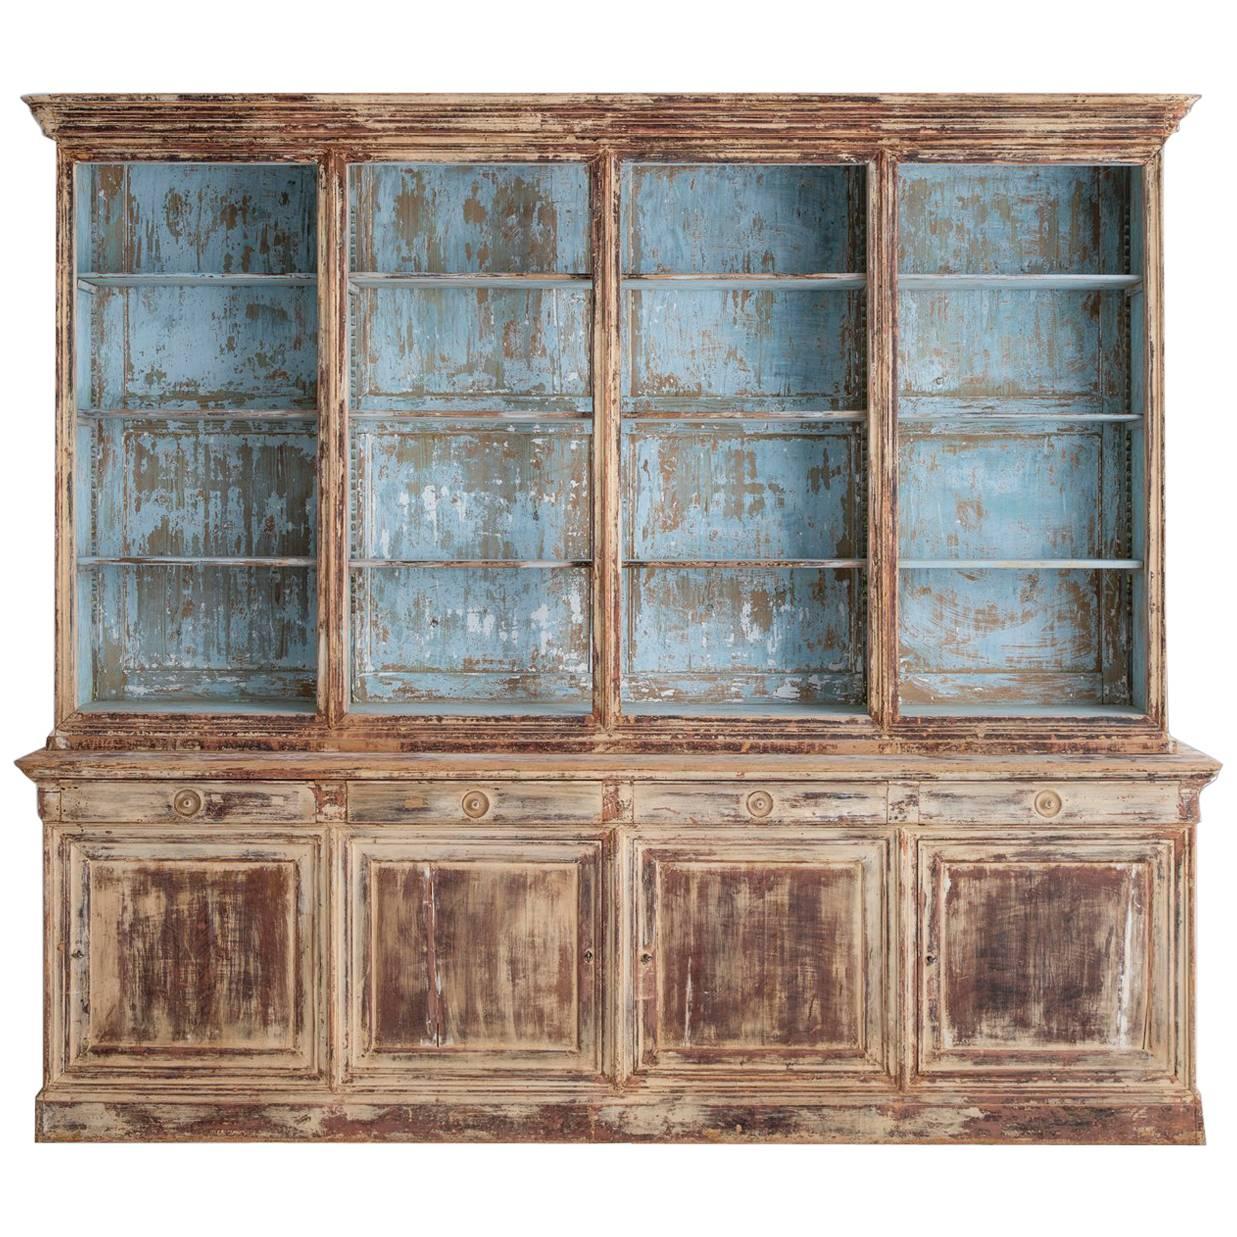 19th Century French Directoire Style Bibliothèque Bookcase in Original Paint